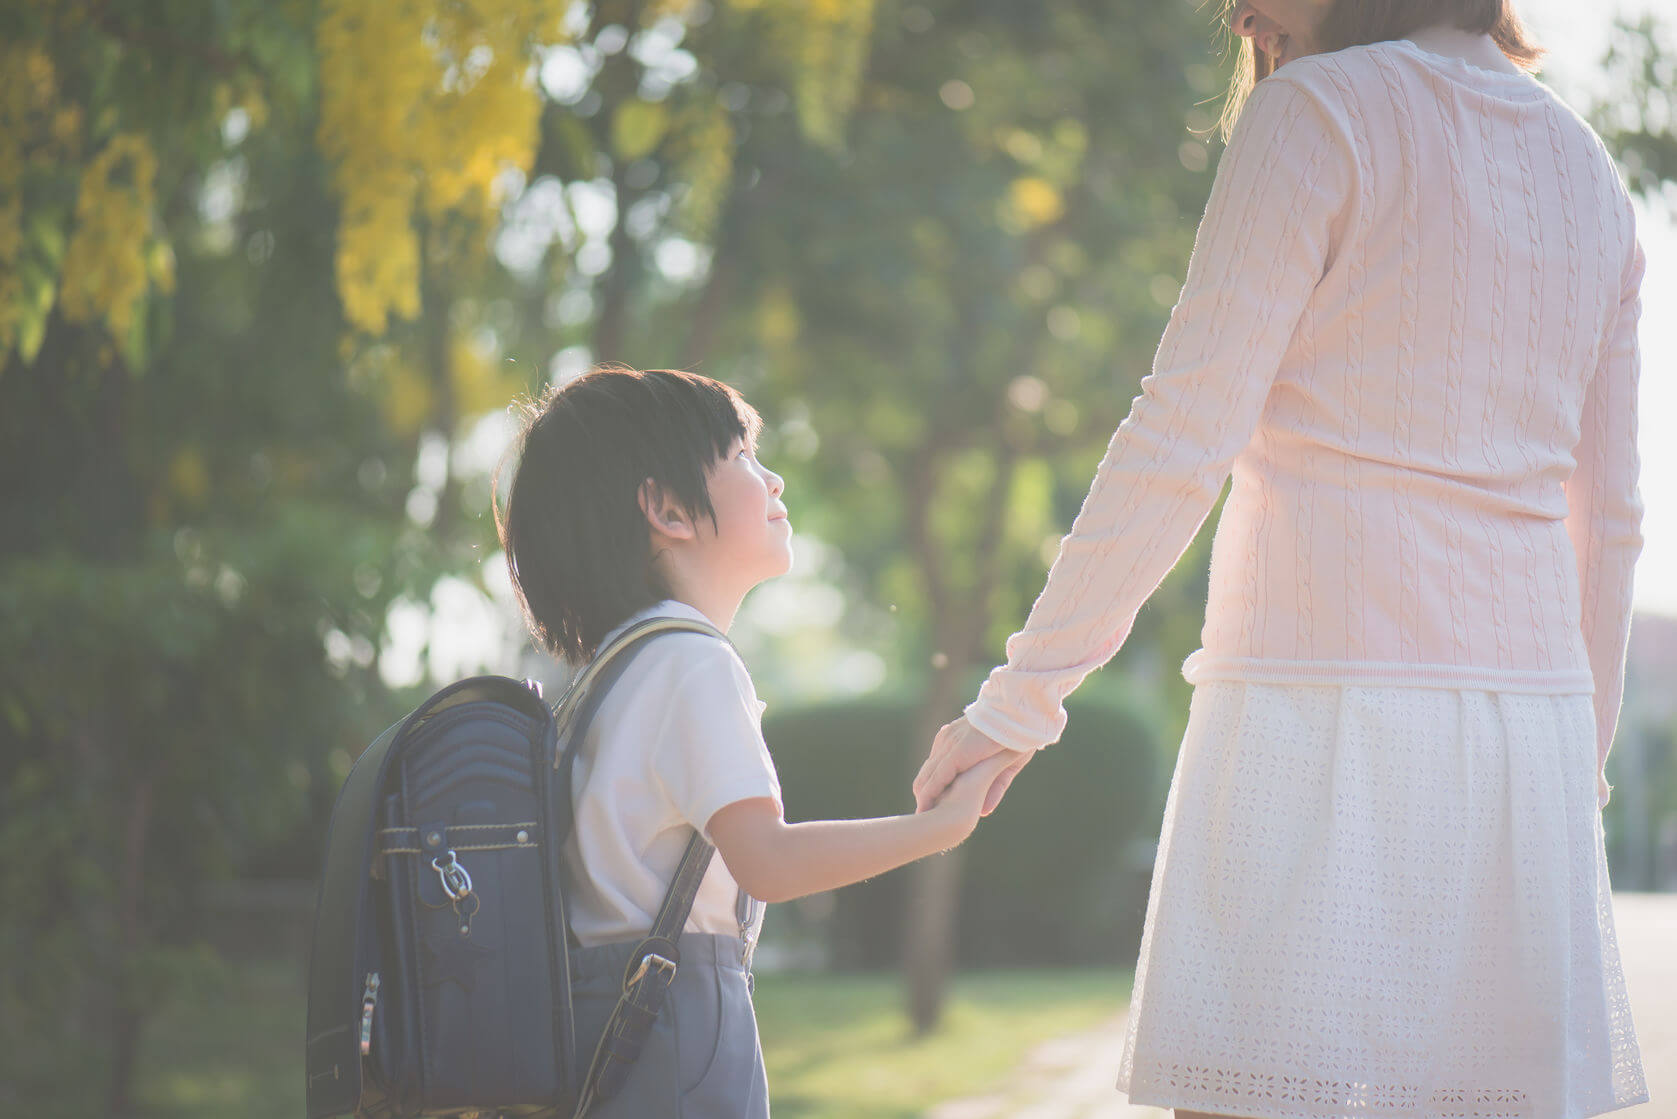 5 Tips of Little one successful first day of school